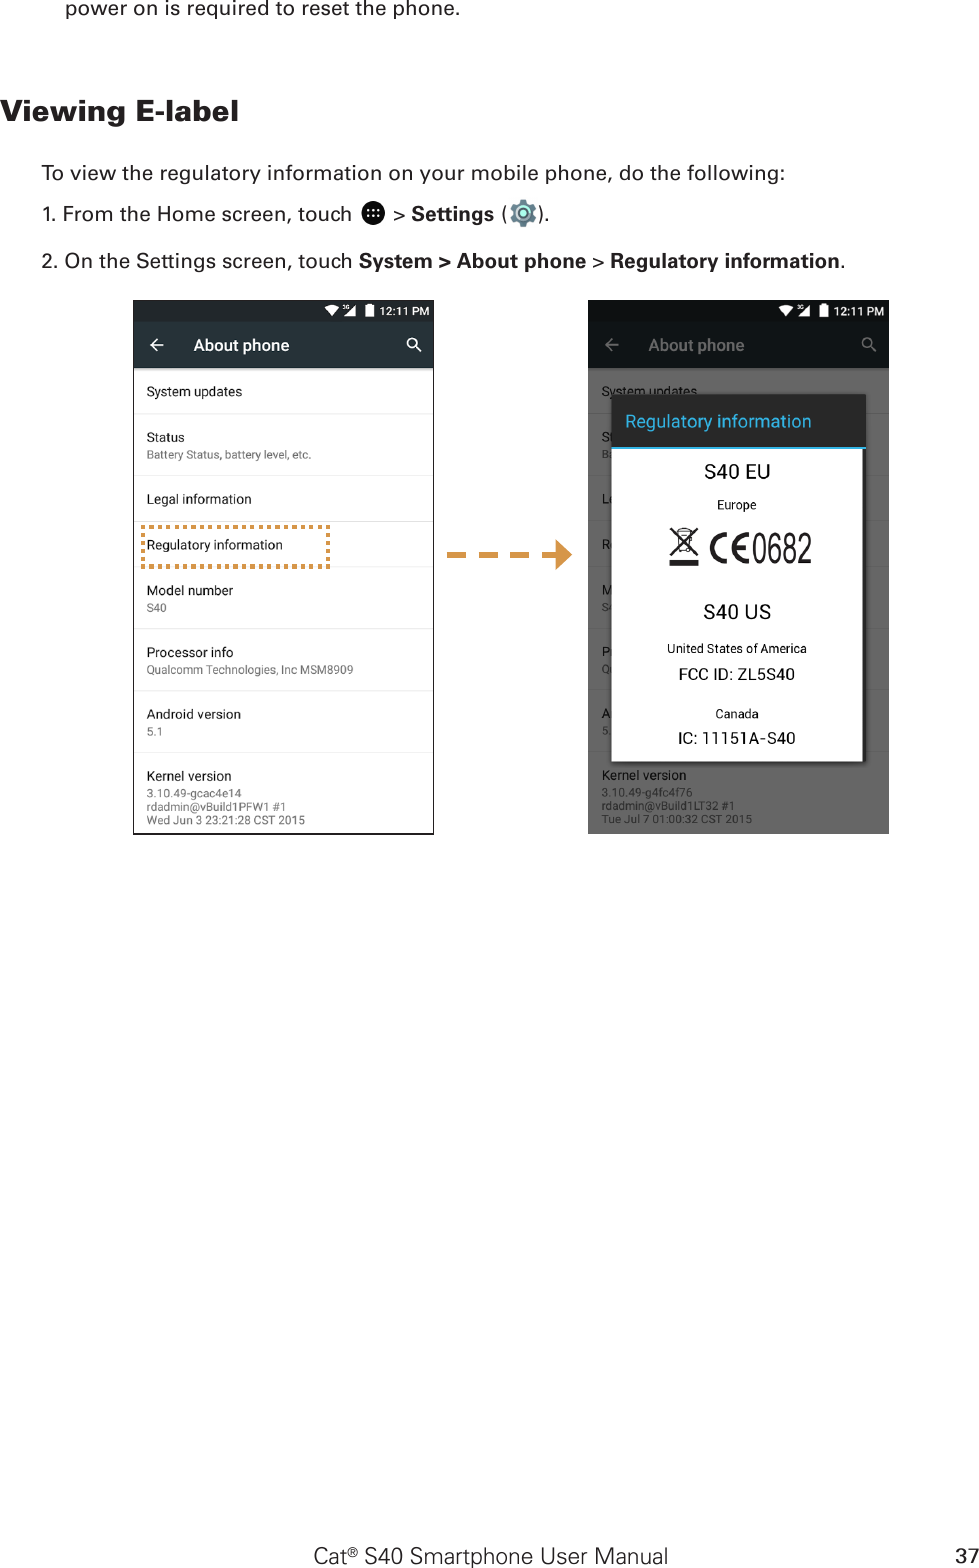 Cat® S40 Smartphone User Manual 37power on is required to reset the phone.Viewing E-labelTo view the regulatory information on your mobile phone, do the following:1. From the Home screen, touch   &gt; Settings ( ).2. On the Settings screen, touch System &gt; About phone &gt; Regulatory information.